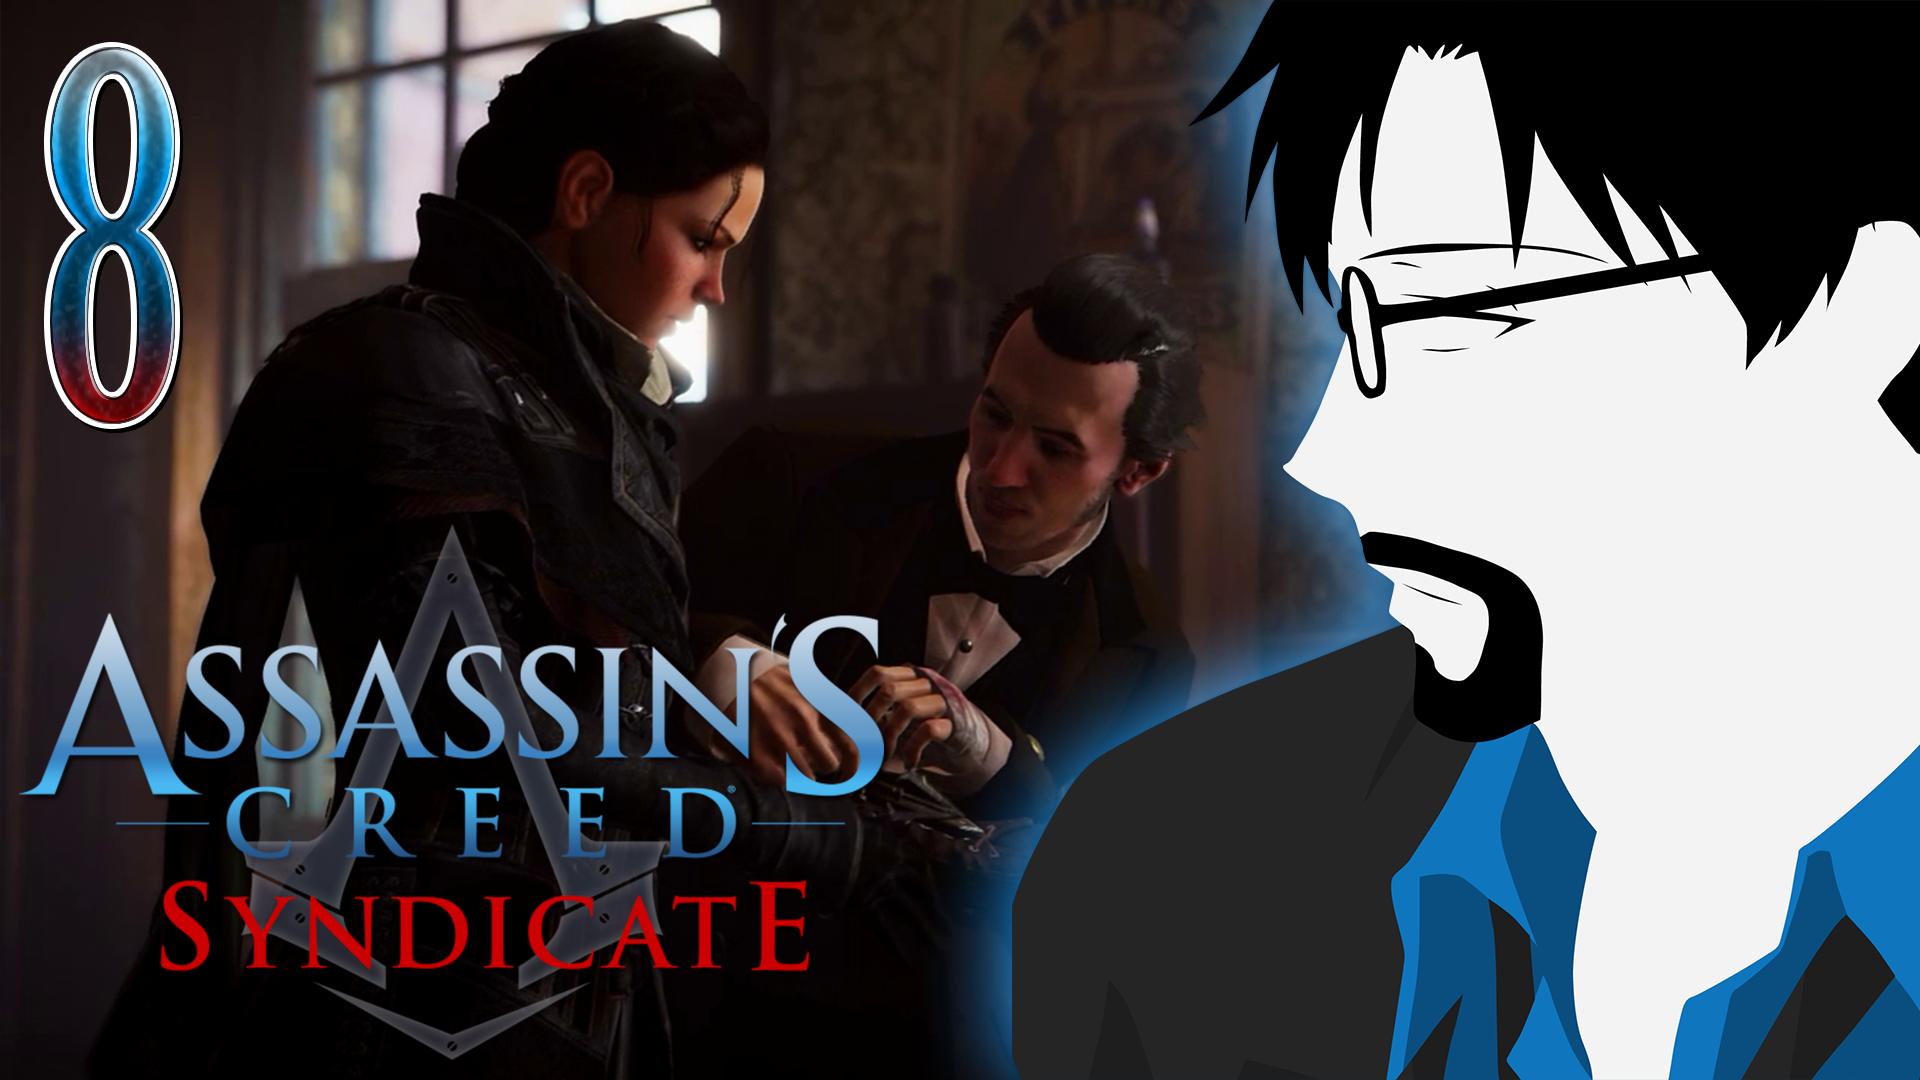 Assassin’s Creed Syndicate: Freeing Whitechapel – PART 8 [RtG]